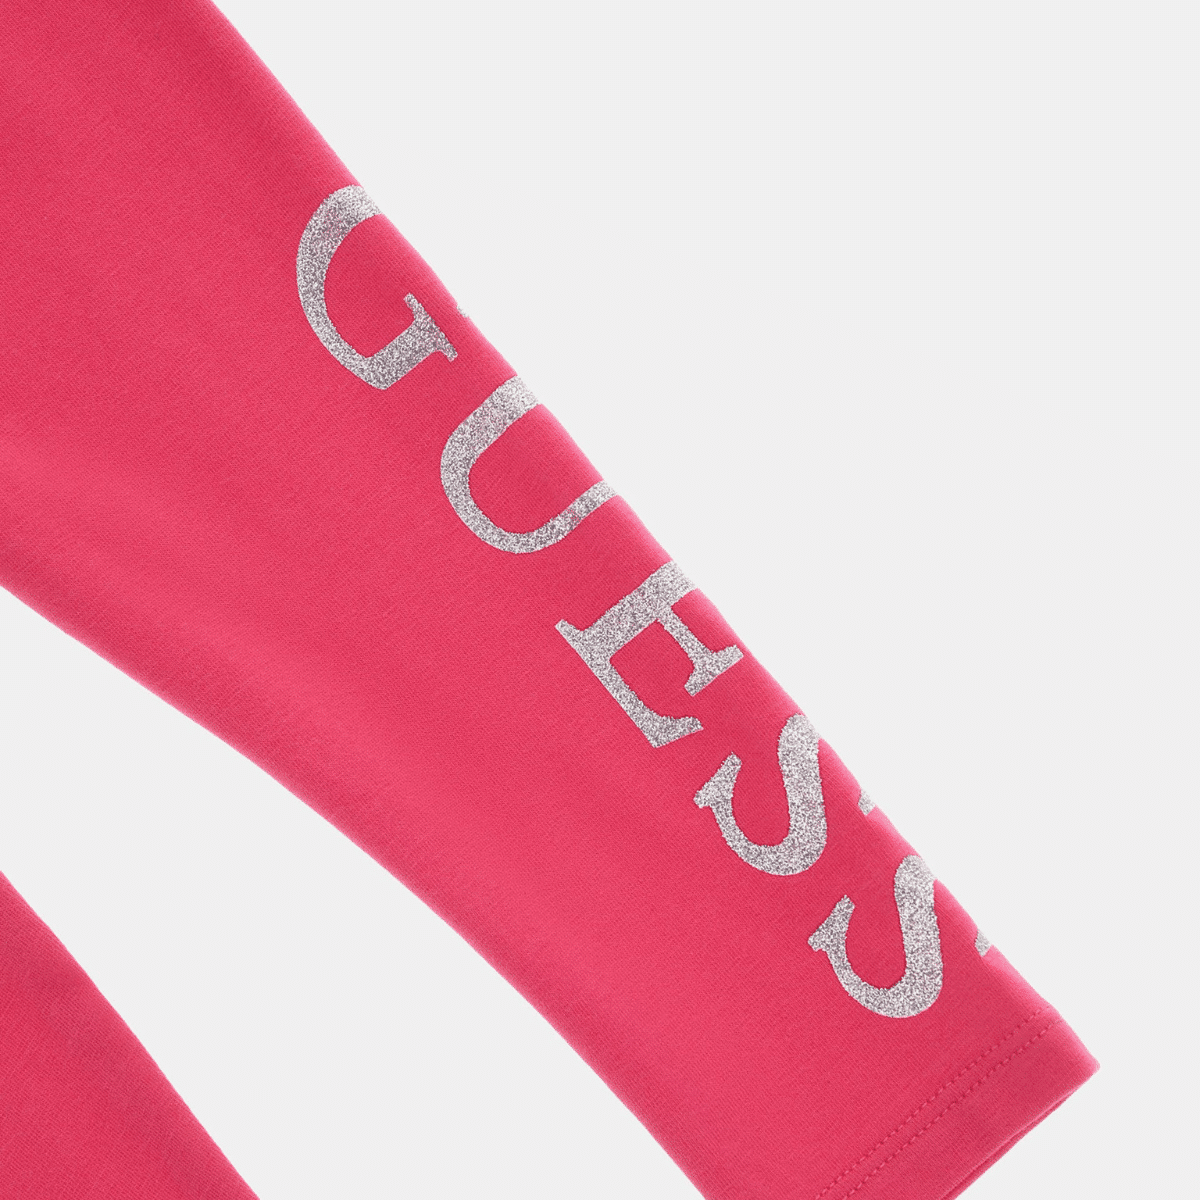 Guess pink girls leggings with large silver logo